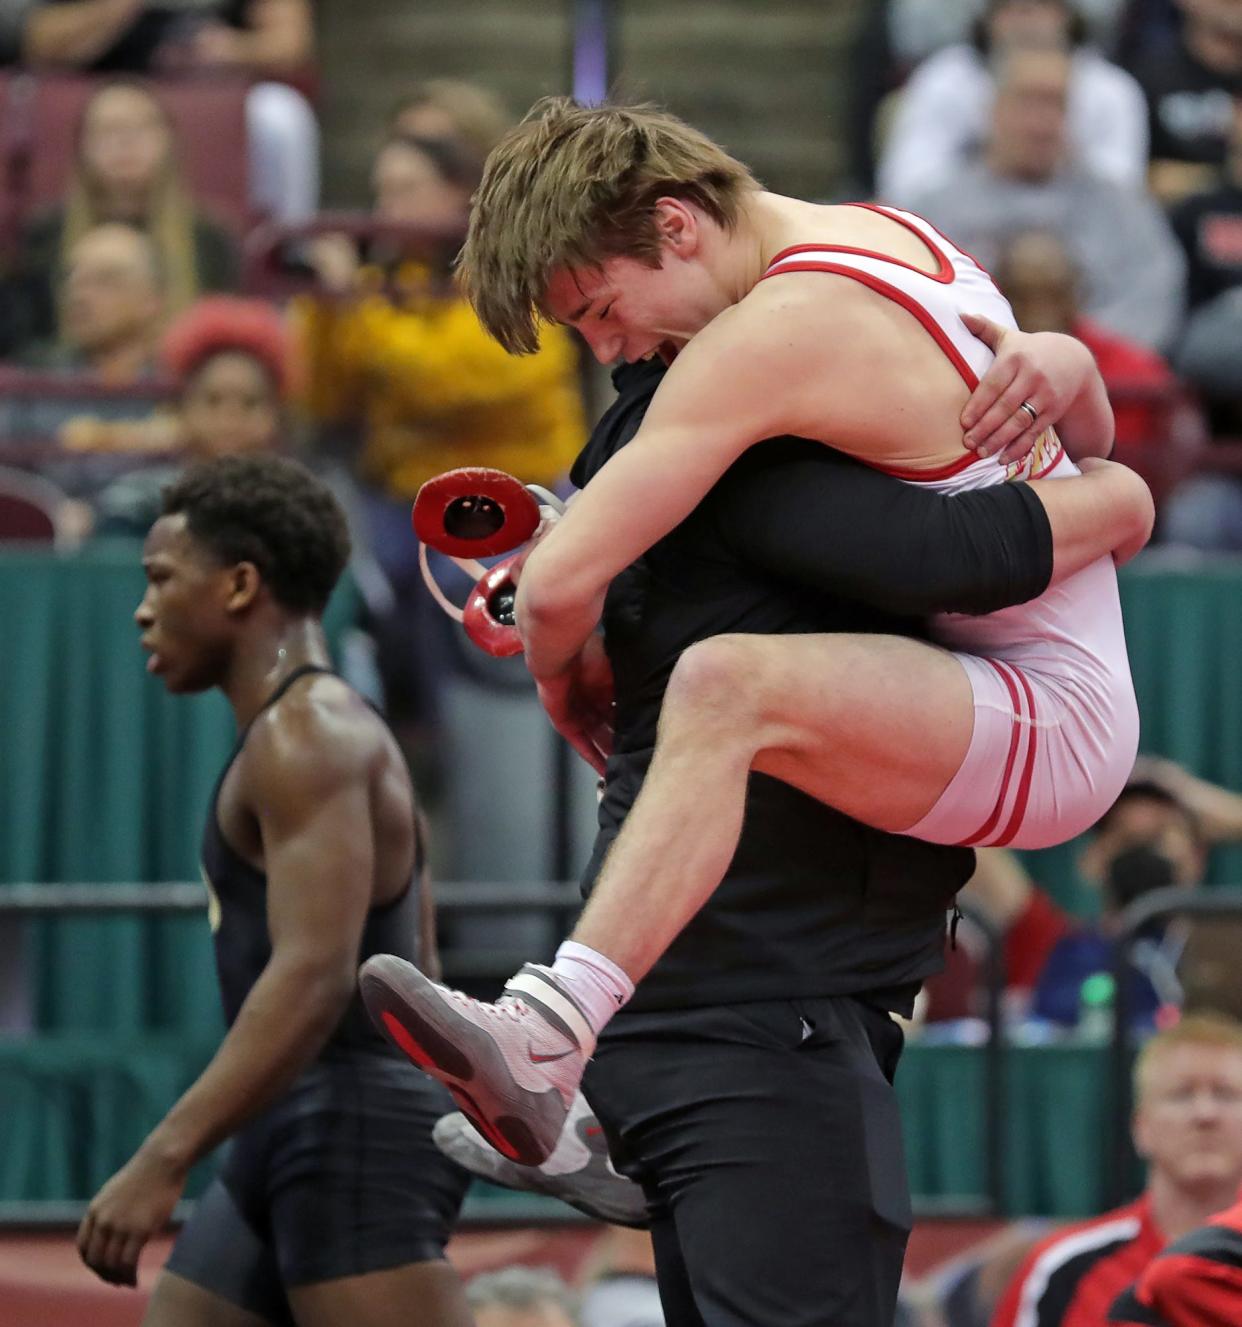 Wadsworth's Chris Earnest, right, leaps into the arms of wrestling coach Clay Wenger after beating Perrysburg's Wynton Denkins, left, by major decision to win the D150 pound Division I state title during the OHSAA State Wrestling Tournament at the Jerome Schottenstein Center on Sunday.